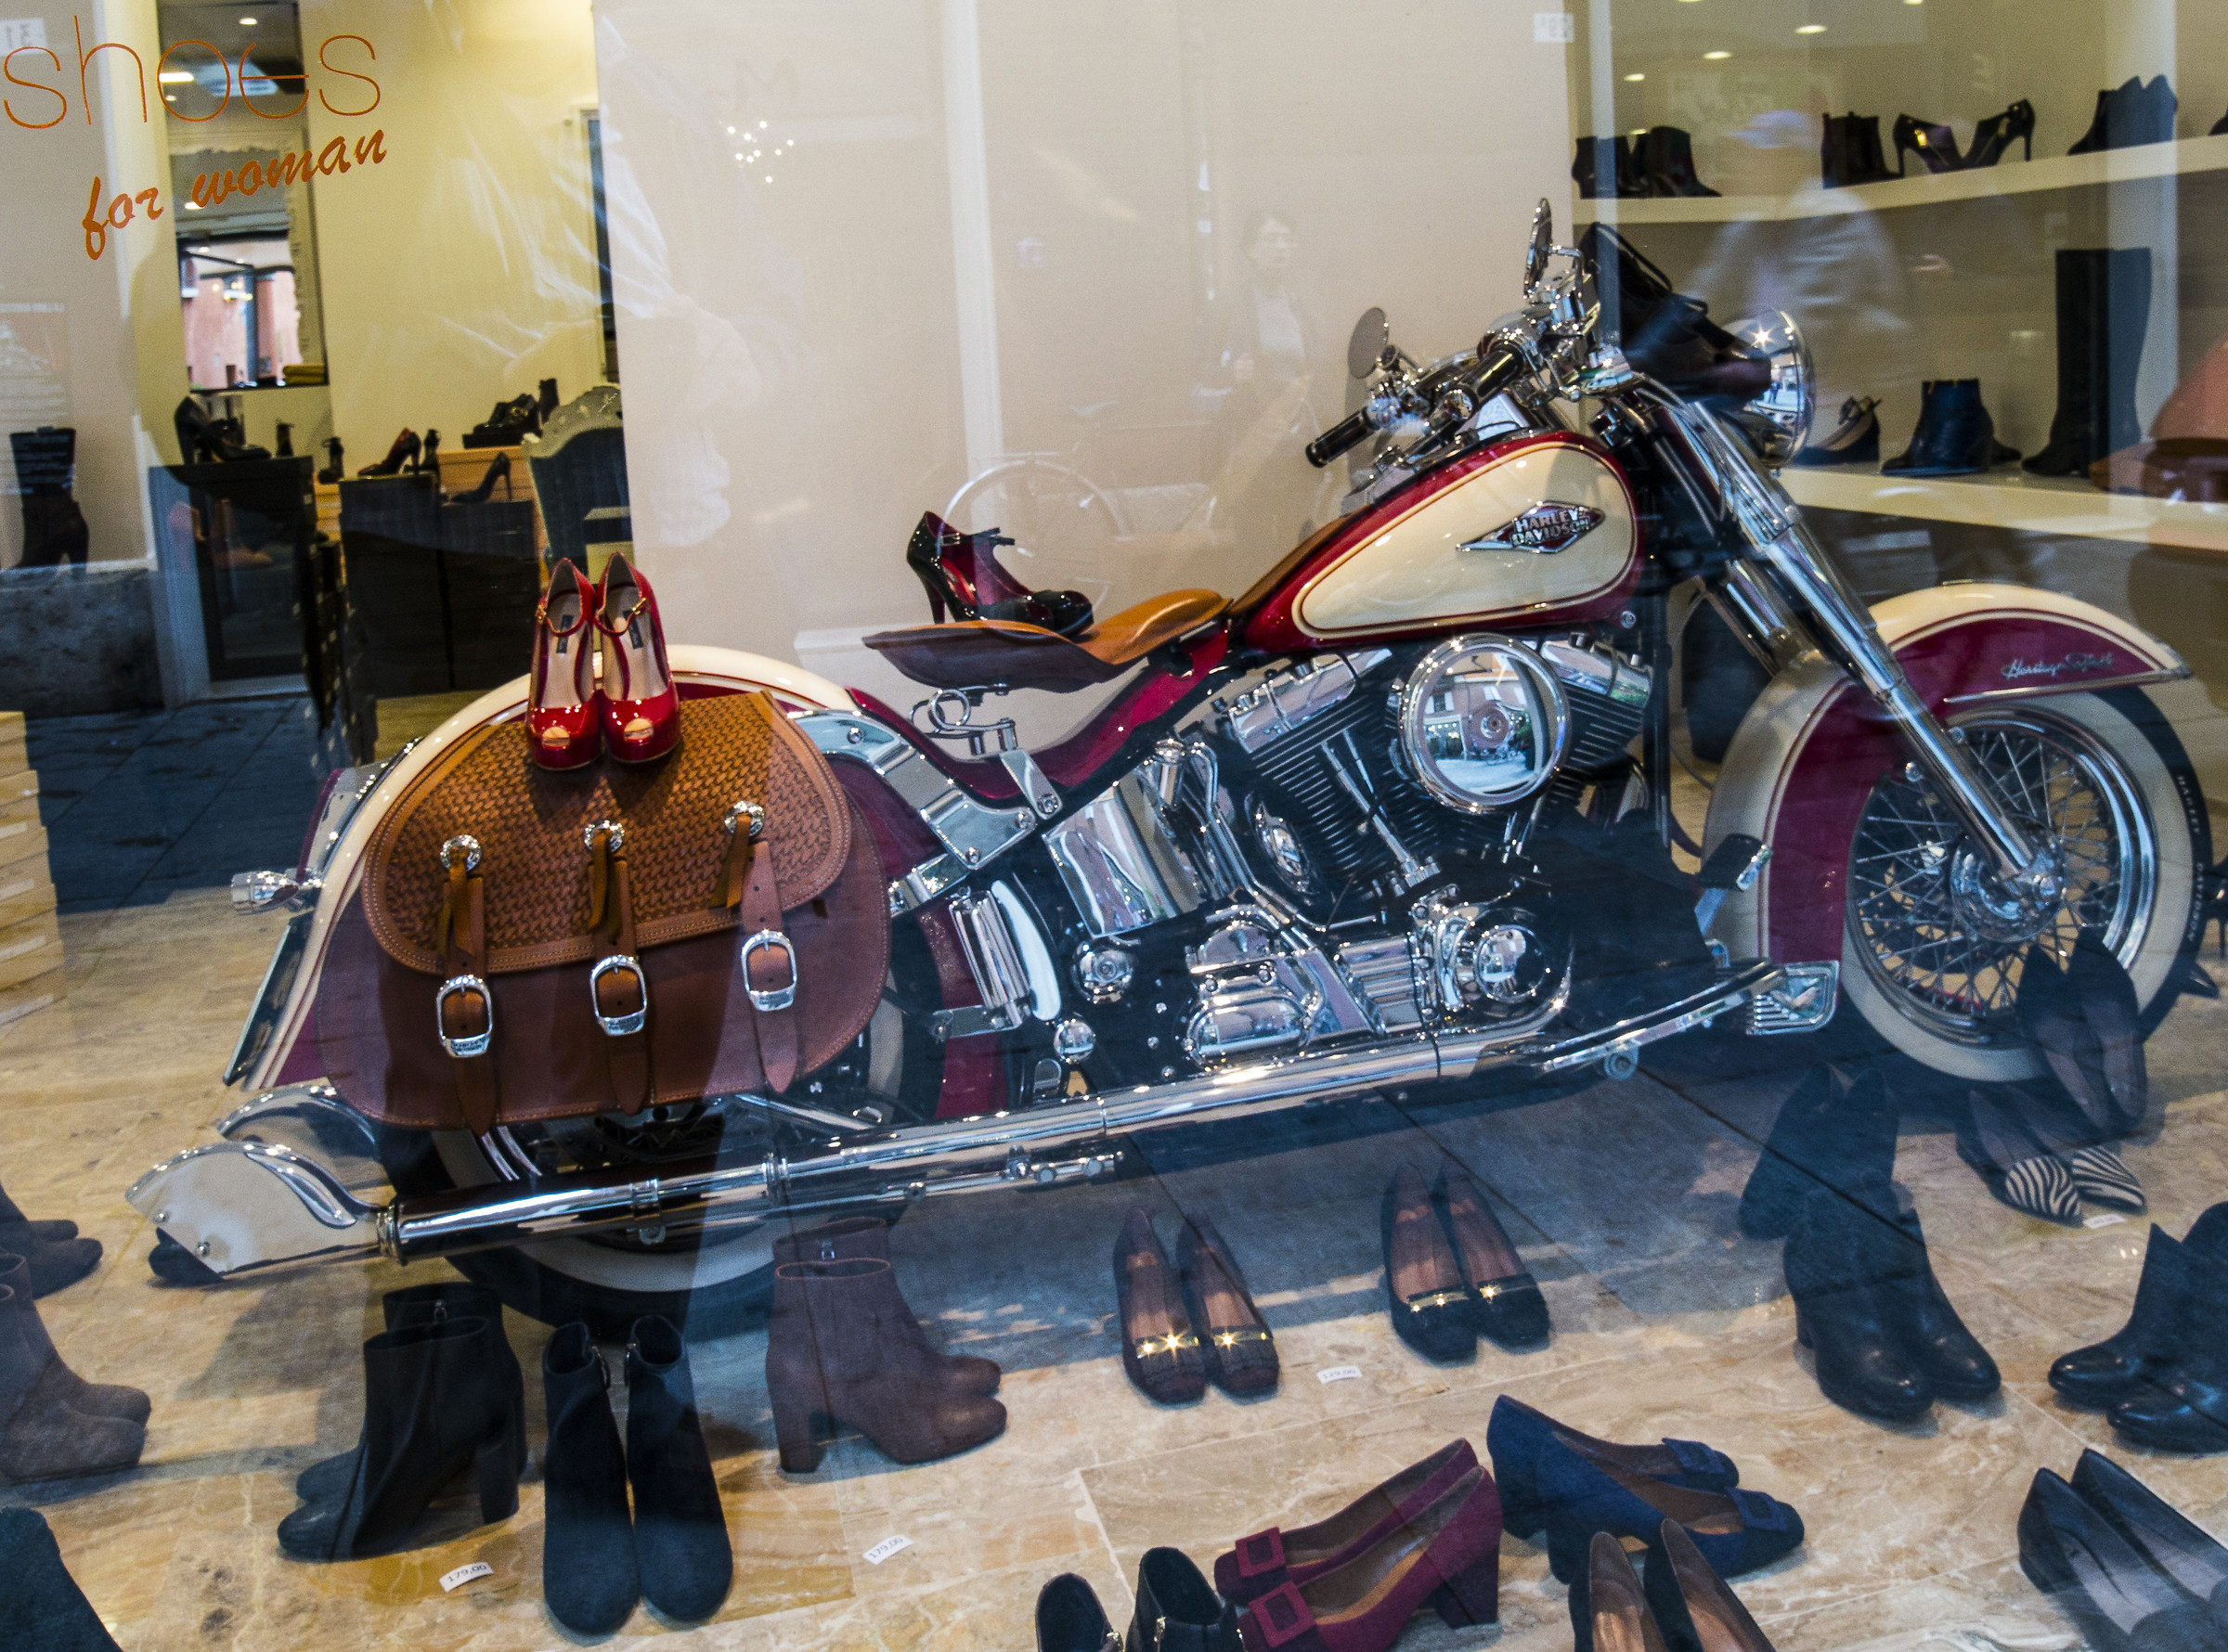 Shoes and bikes...